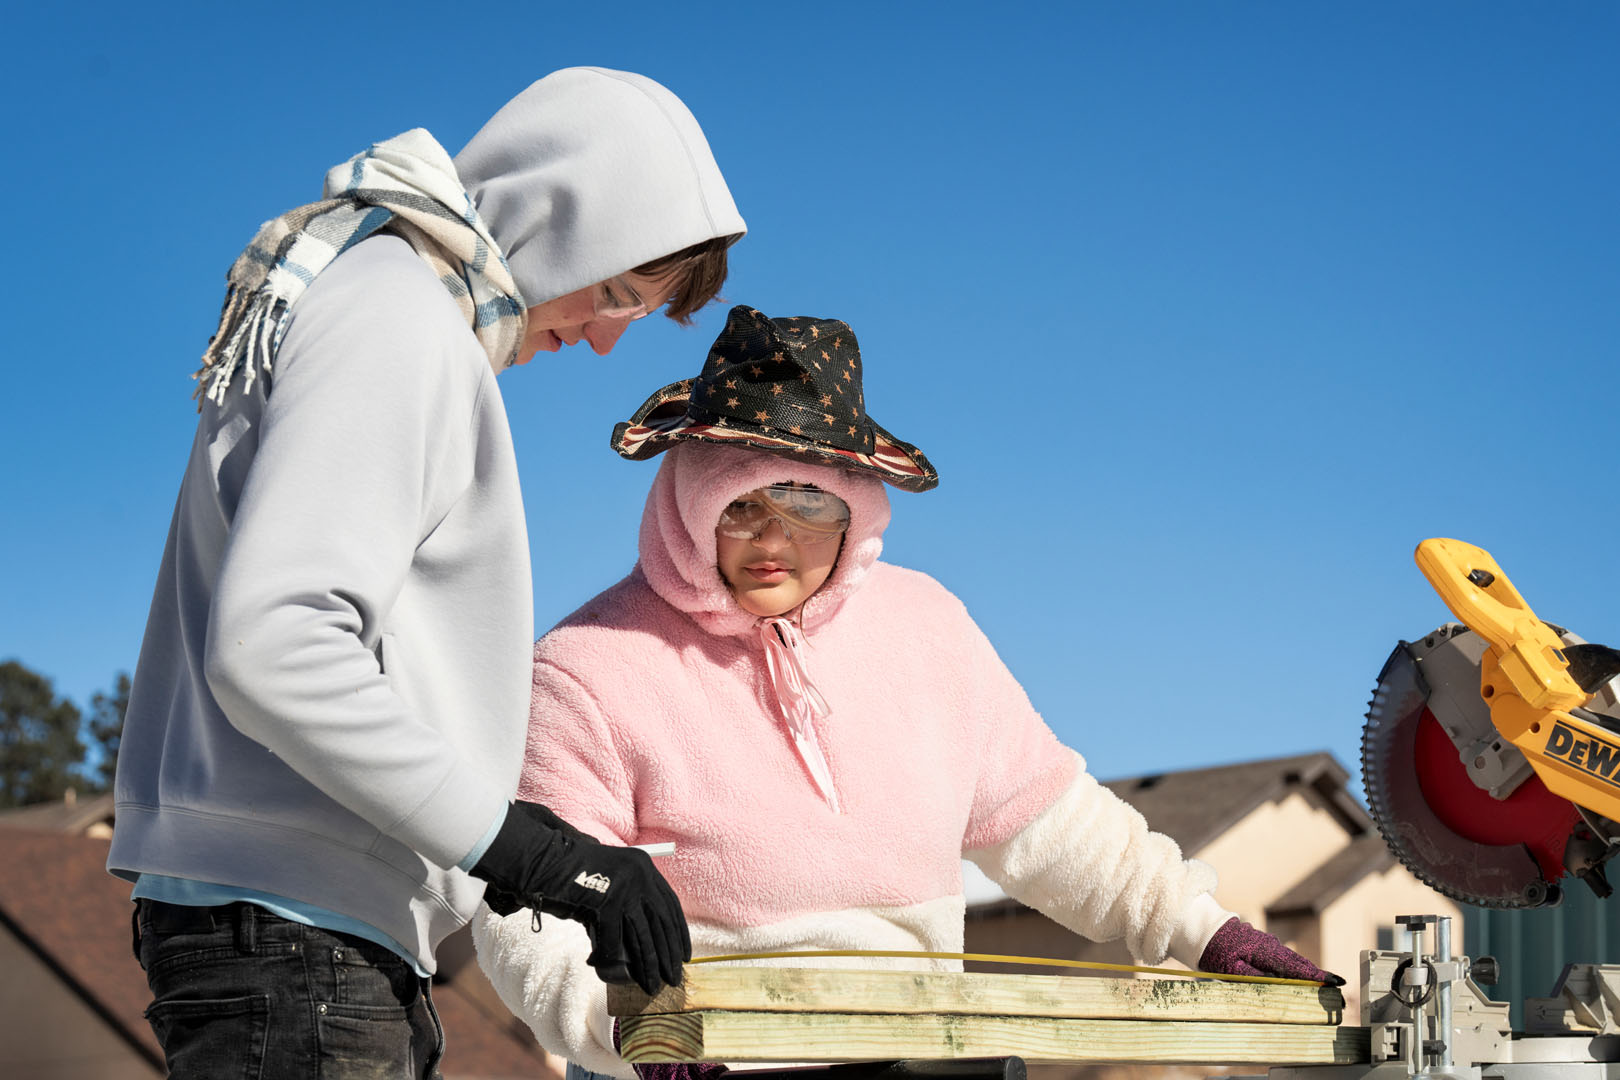 Francis Black '26 and Doré Young ’23 are pictured working at a Habitat for Humanity work site in Woodland Park on Jan. 26, 2023, as part of their WSO Priddy. Photo by Lonnie Timmons III / Colorado College.